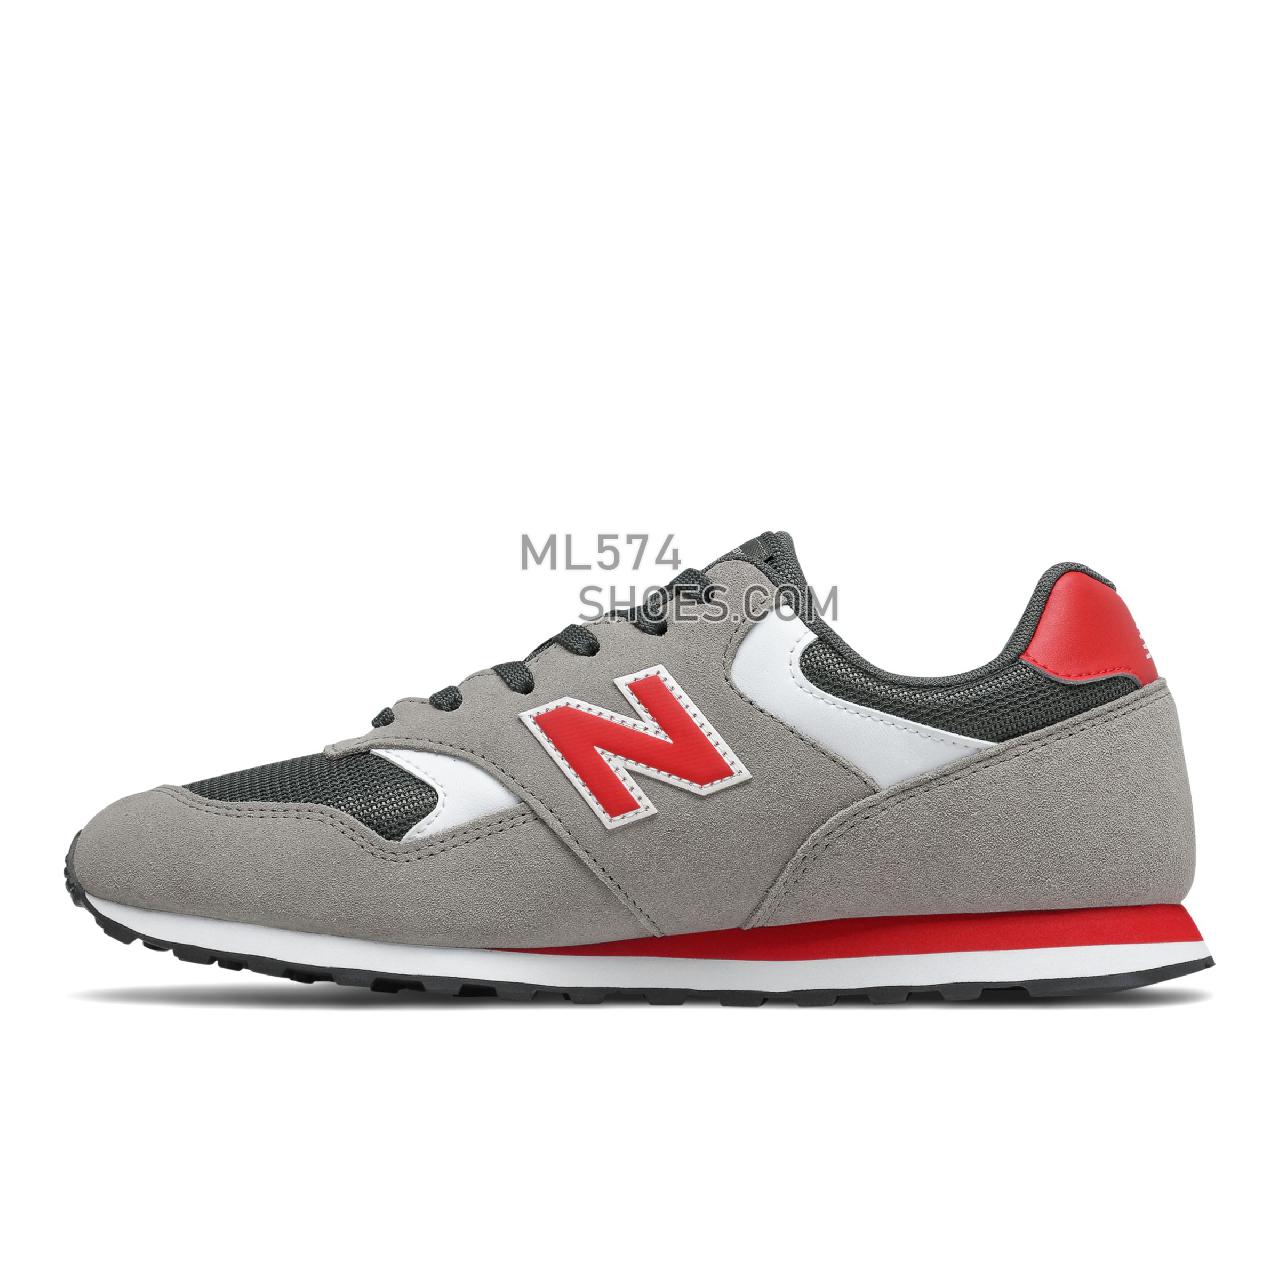 New Balance 393 - Men's Classic Sneakers - Marblehead with Team Red - ML393VT1